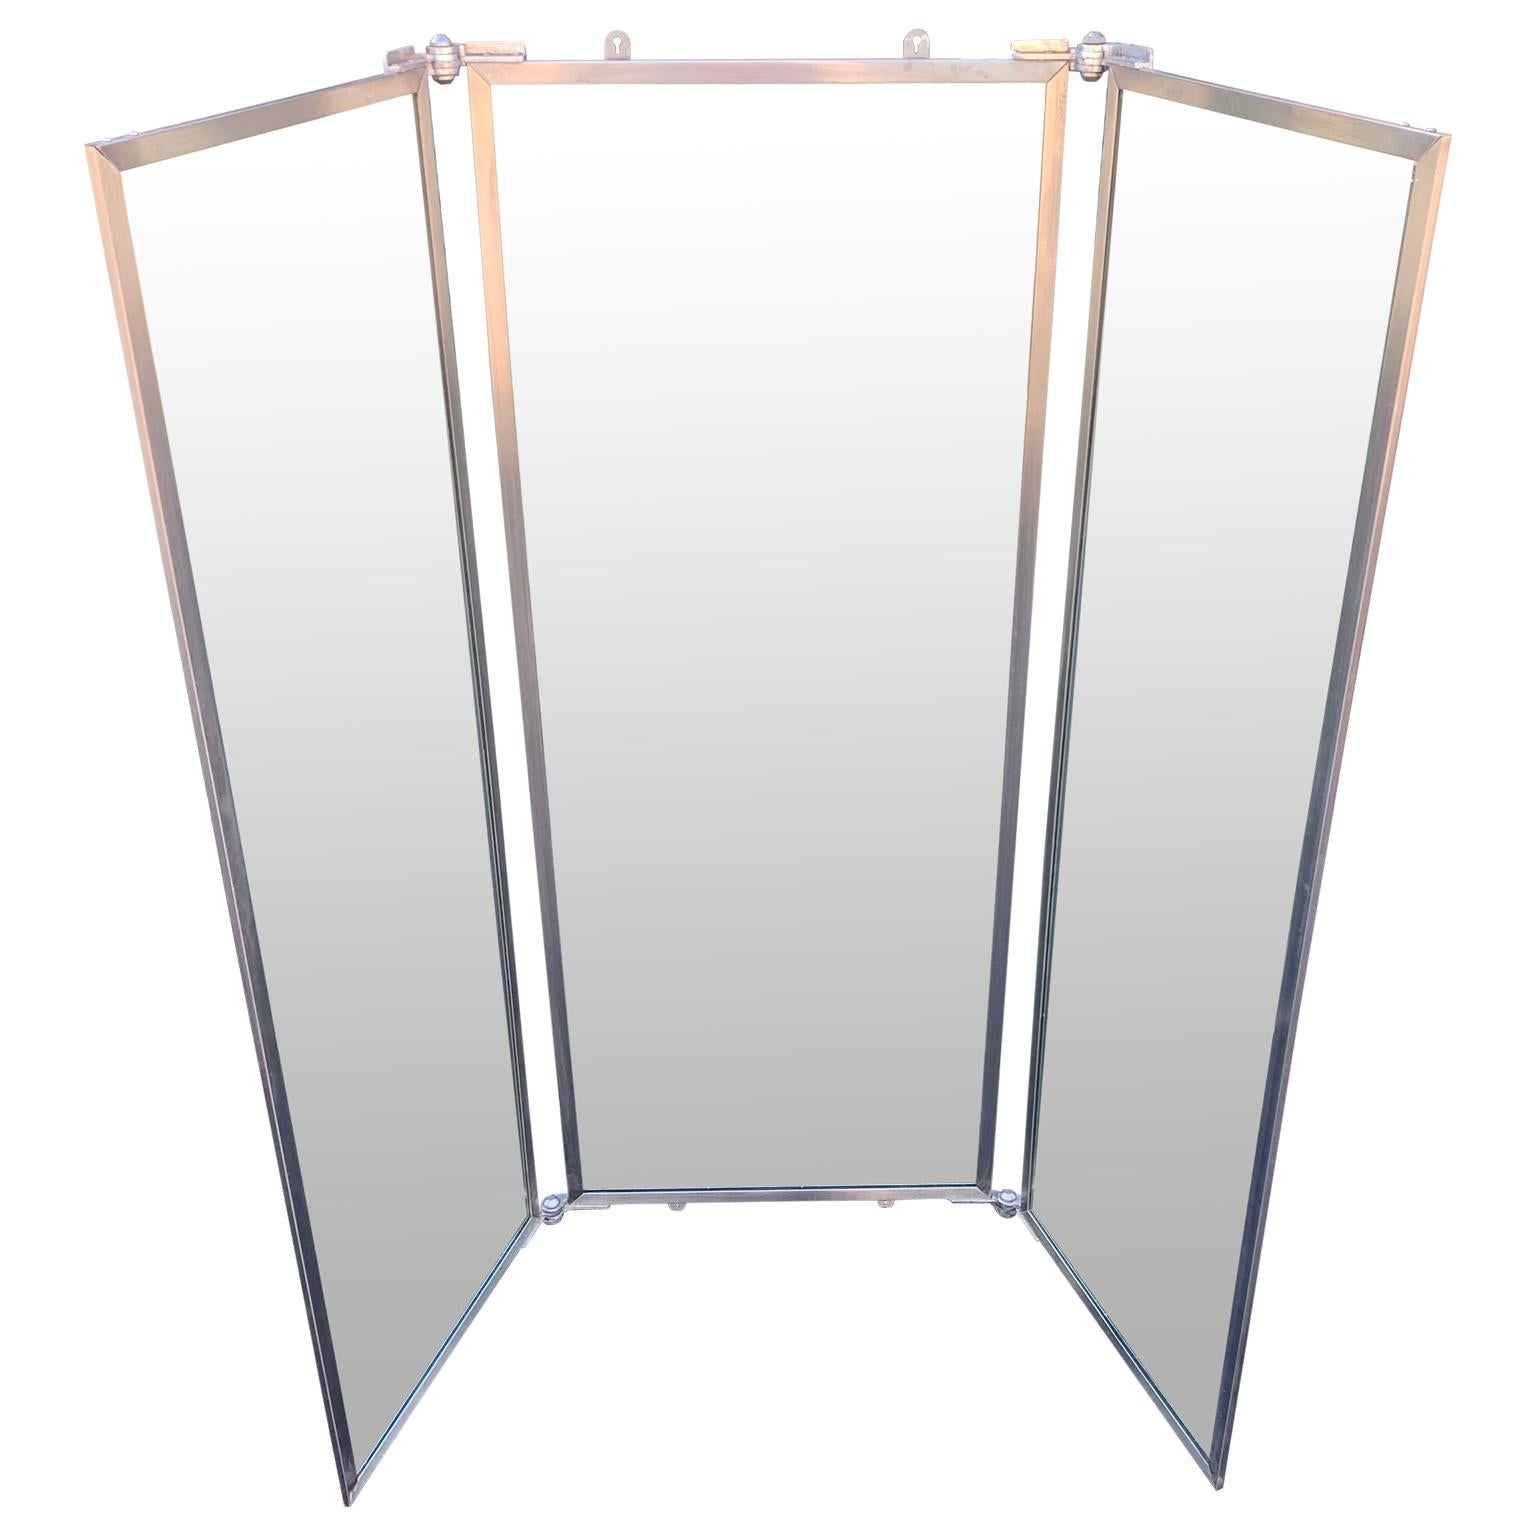 Industrial three-panel mirror and metal folding screen.

Screen measures 22 inches in depth when in horseshoe shape position
Each panel measures 20.2 inches in width and 60.2 inches in height
Screen measures 49 inches in width when in half open